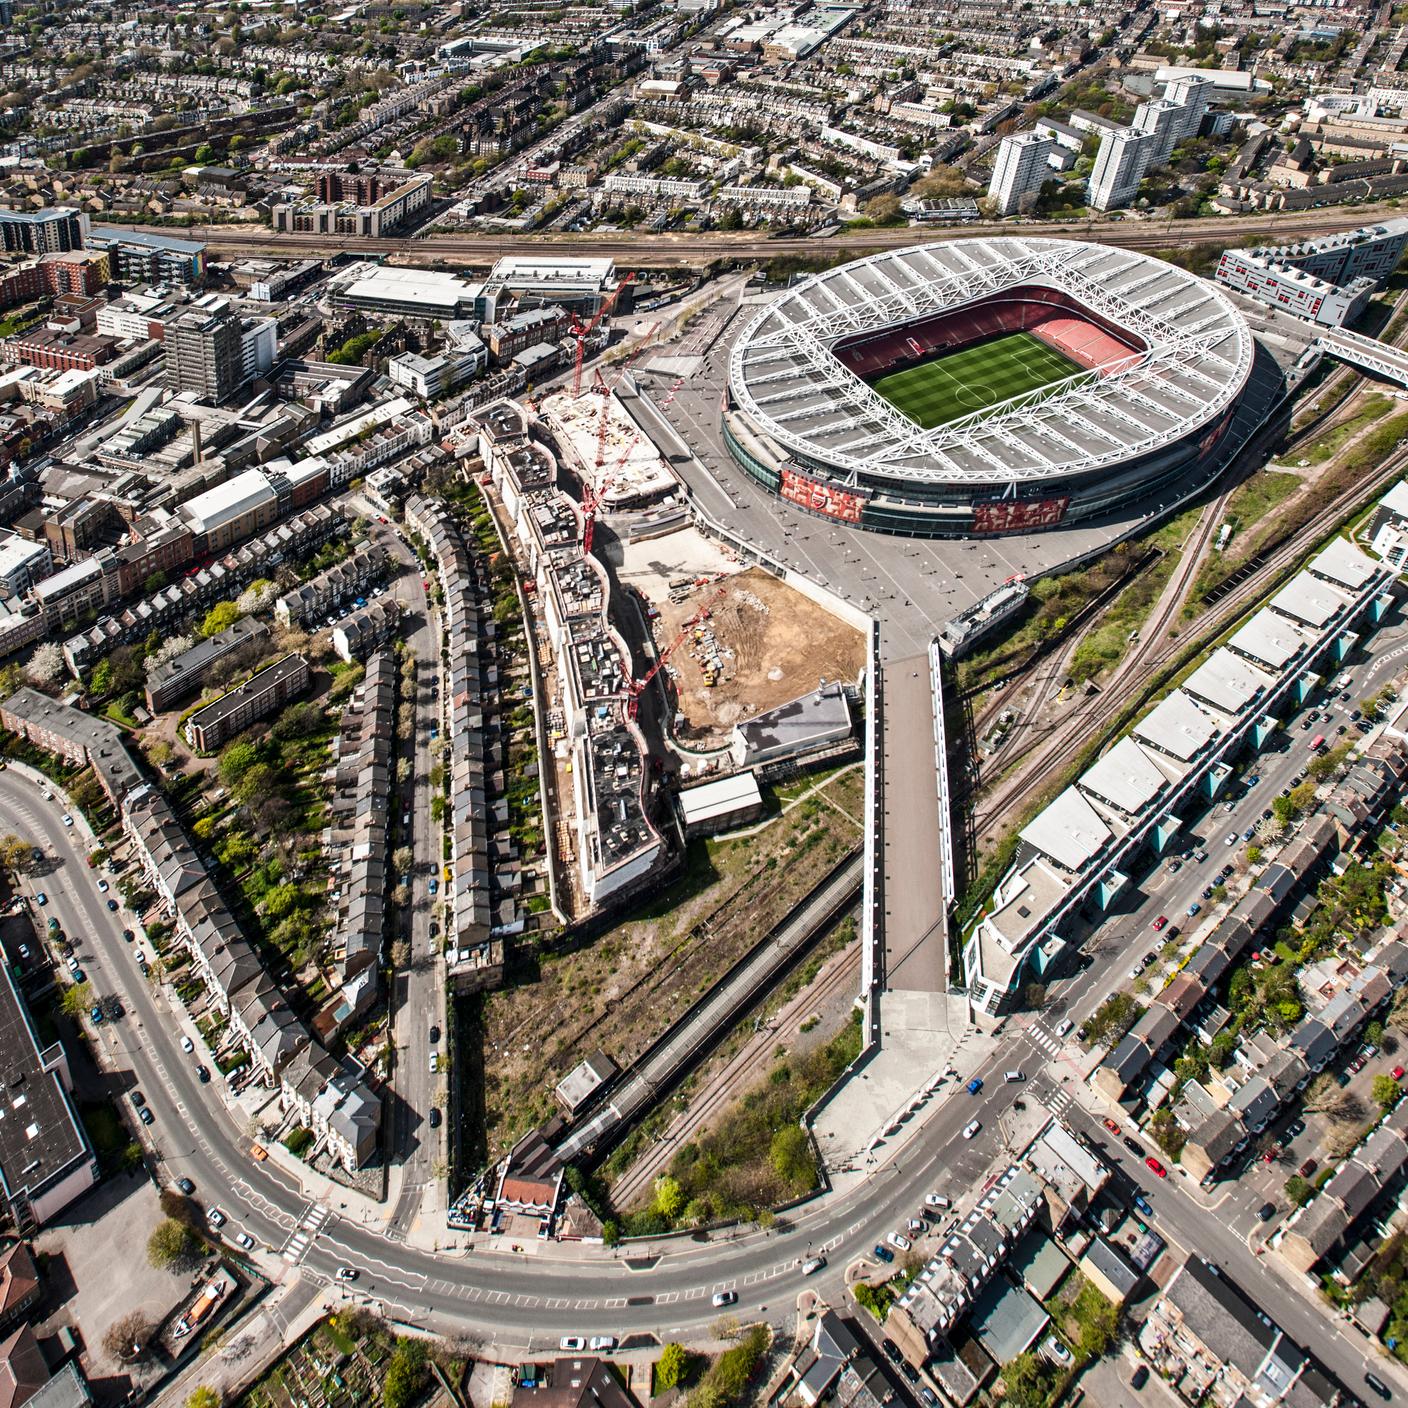 Aresenal Stadium from the air